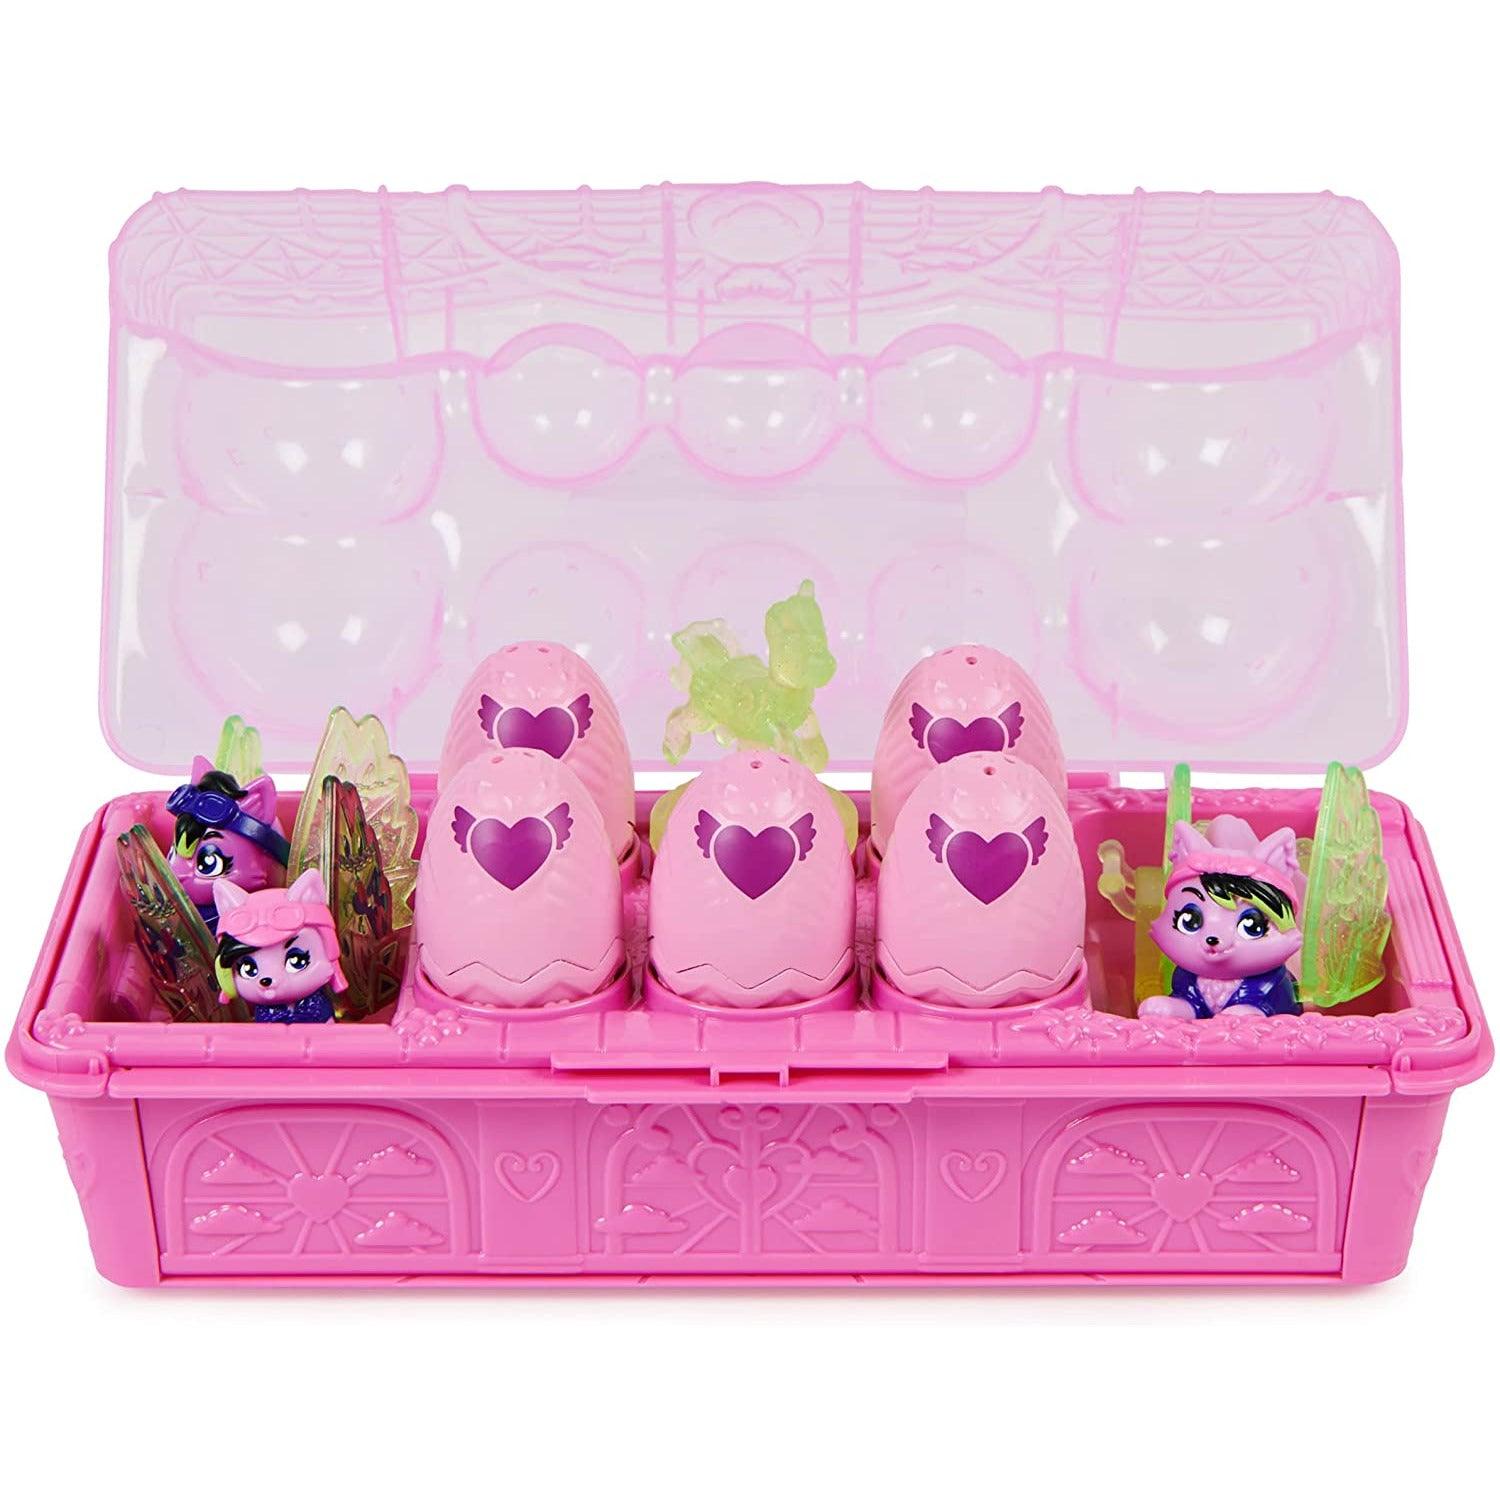 Hatchimals CollEGGtibles, Rainbow-Cation Wolf Family Carton with Surprise Playset. - BumbleToys - 5-7 Years, Girls, Hatchimals CollEGGtibles, Miniature Dolls & Accessories, Pre-Order